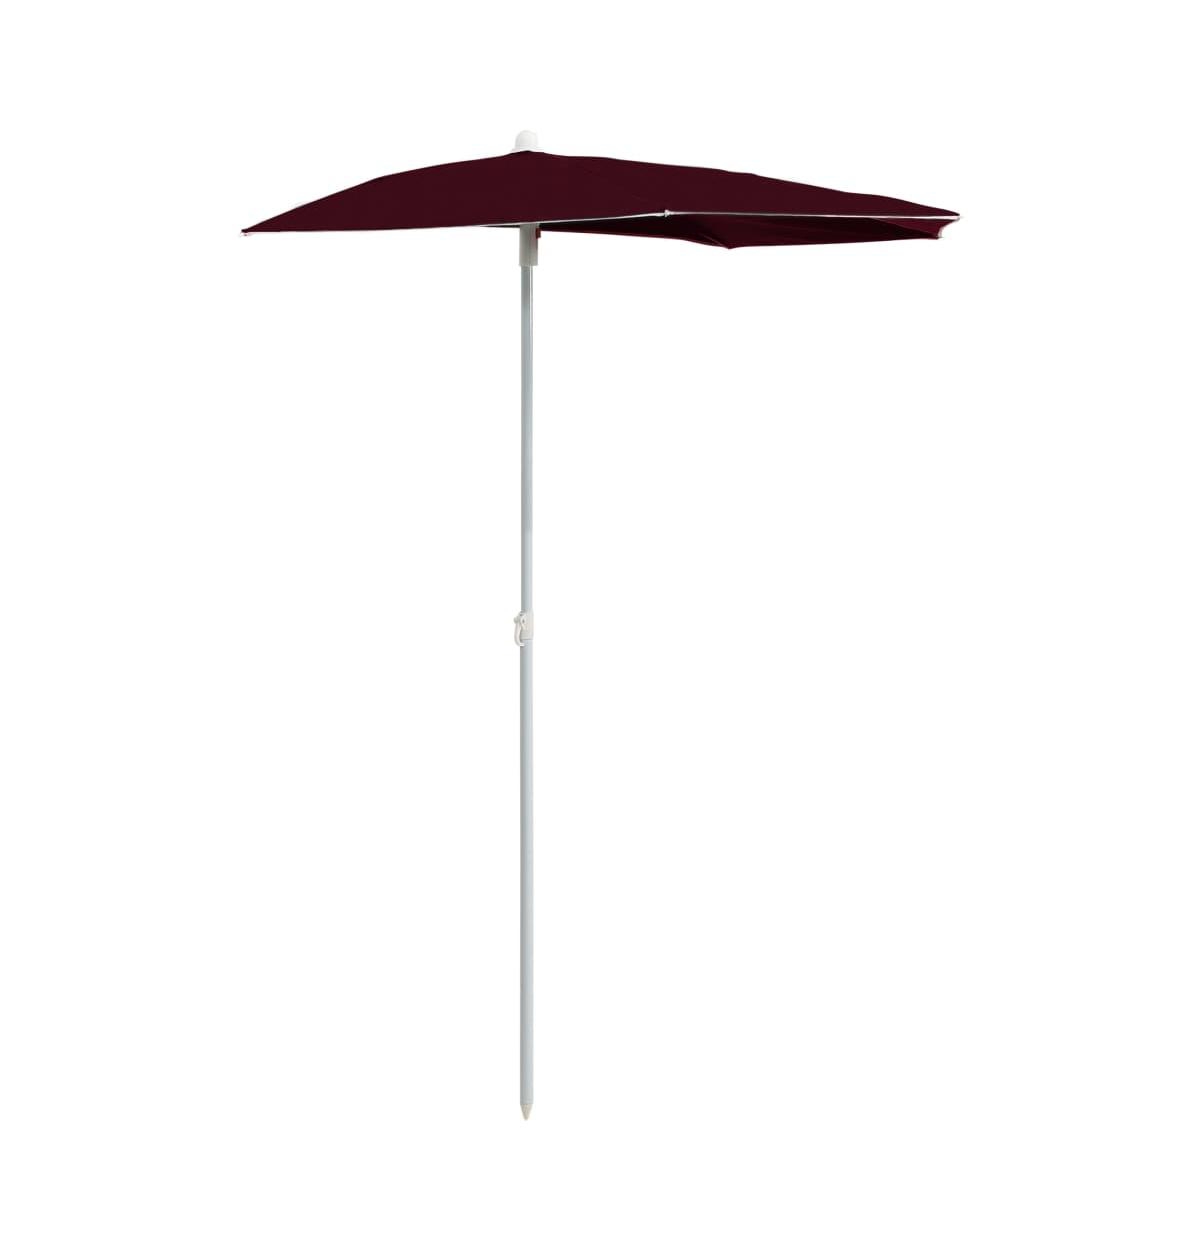 Garden Half Parasol with Pole 70.9"x35.4" Bordeaux Red - Red